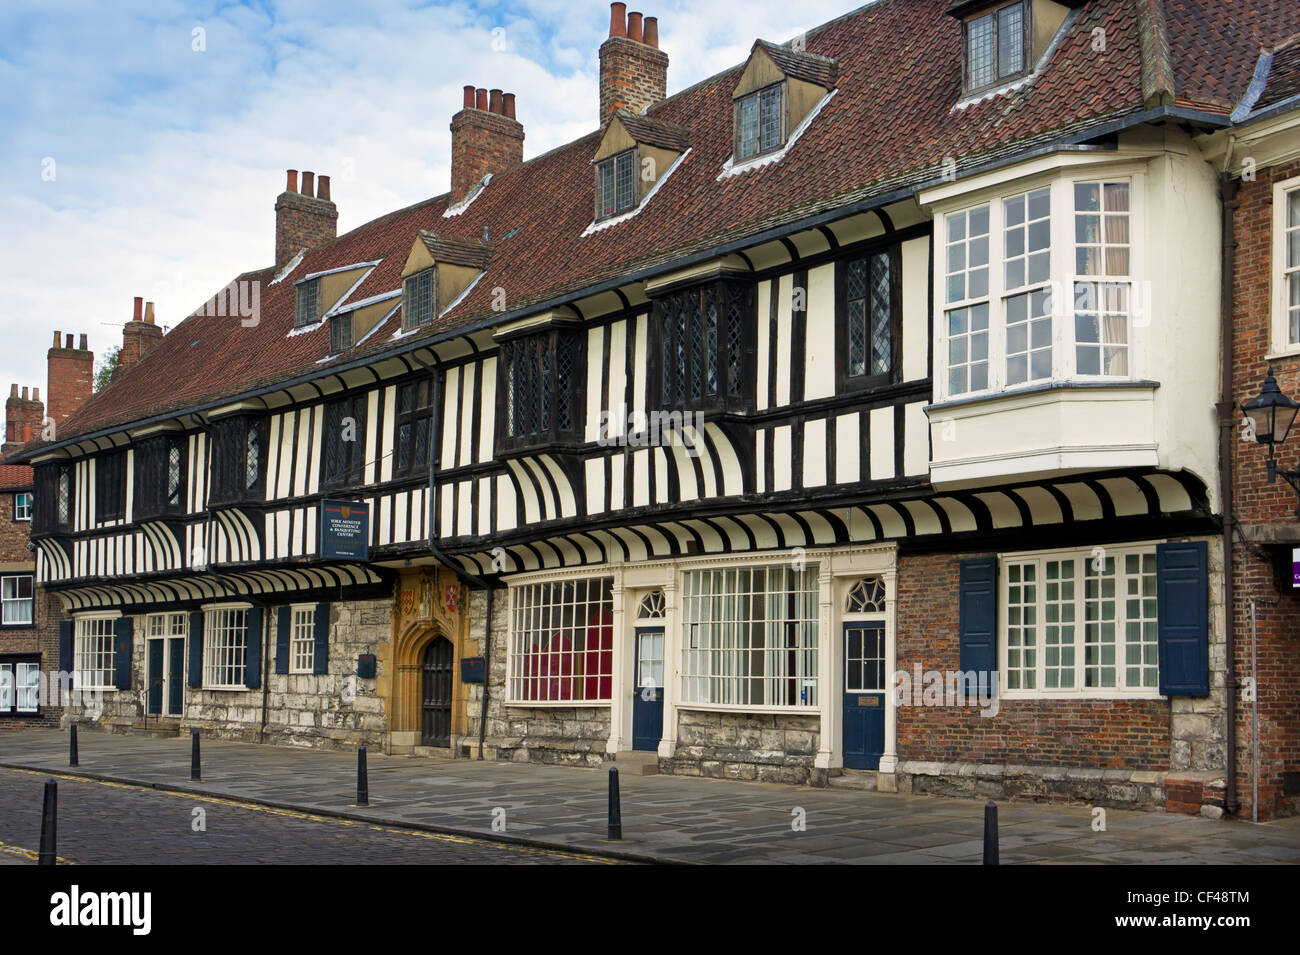 York Minster Conference and Banqueting Centre in St William's College founded in 1461. Stock Photo